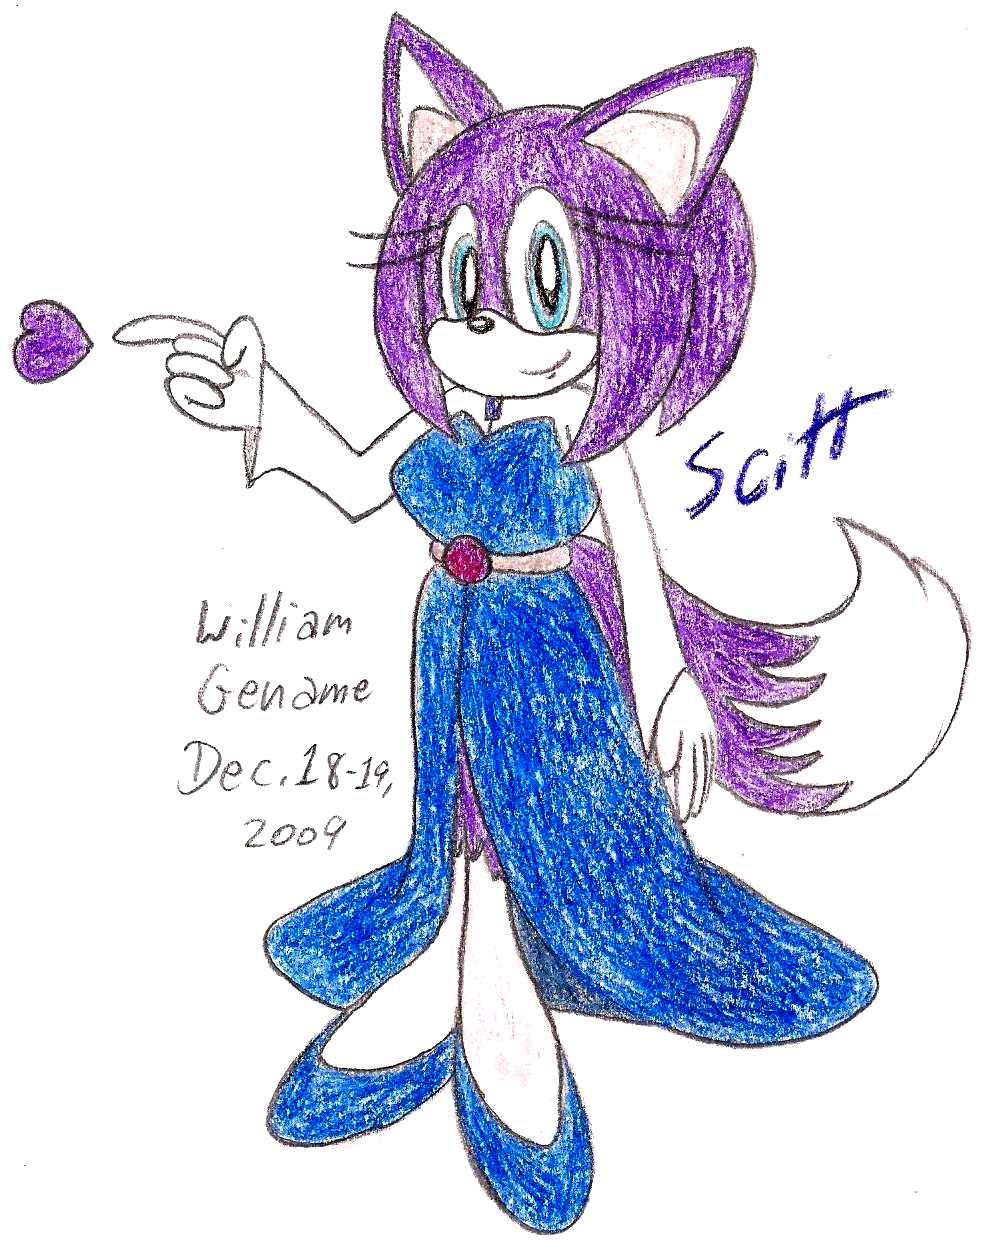 Scitt's Blue Amy Dress by germanname